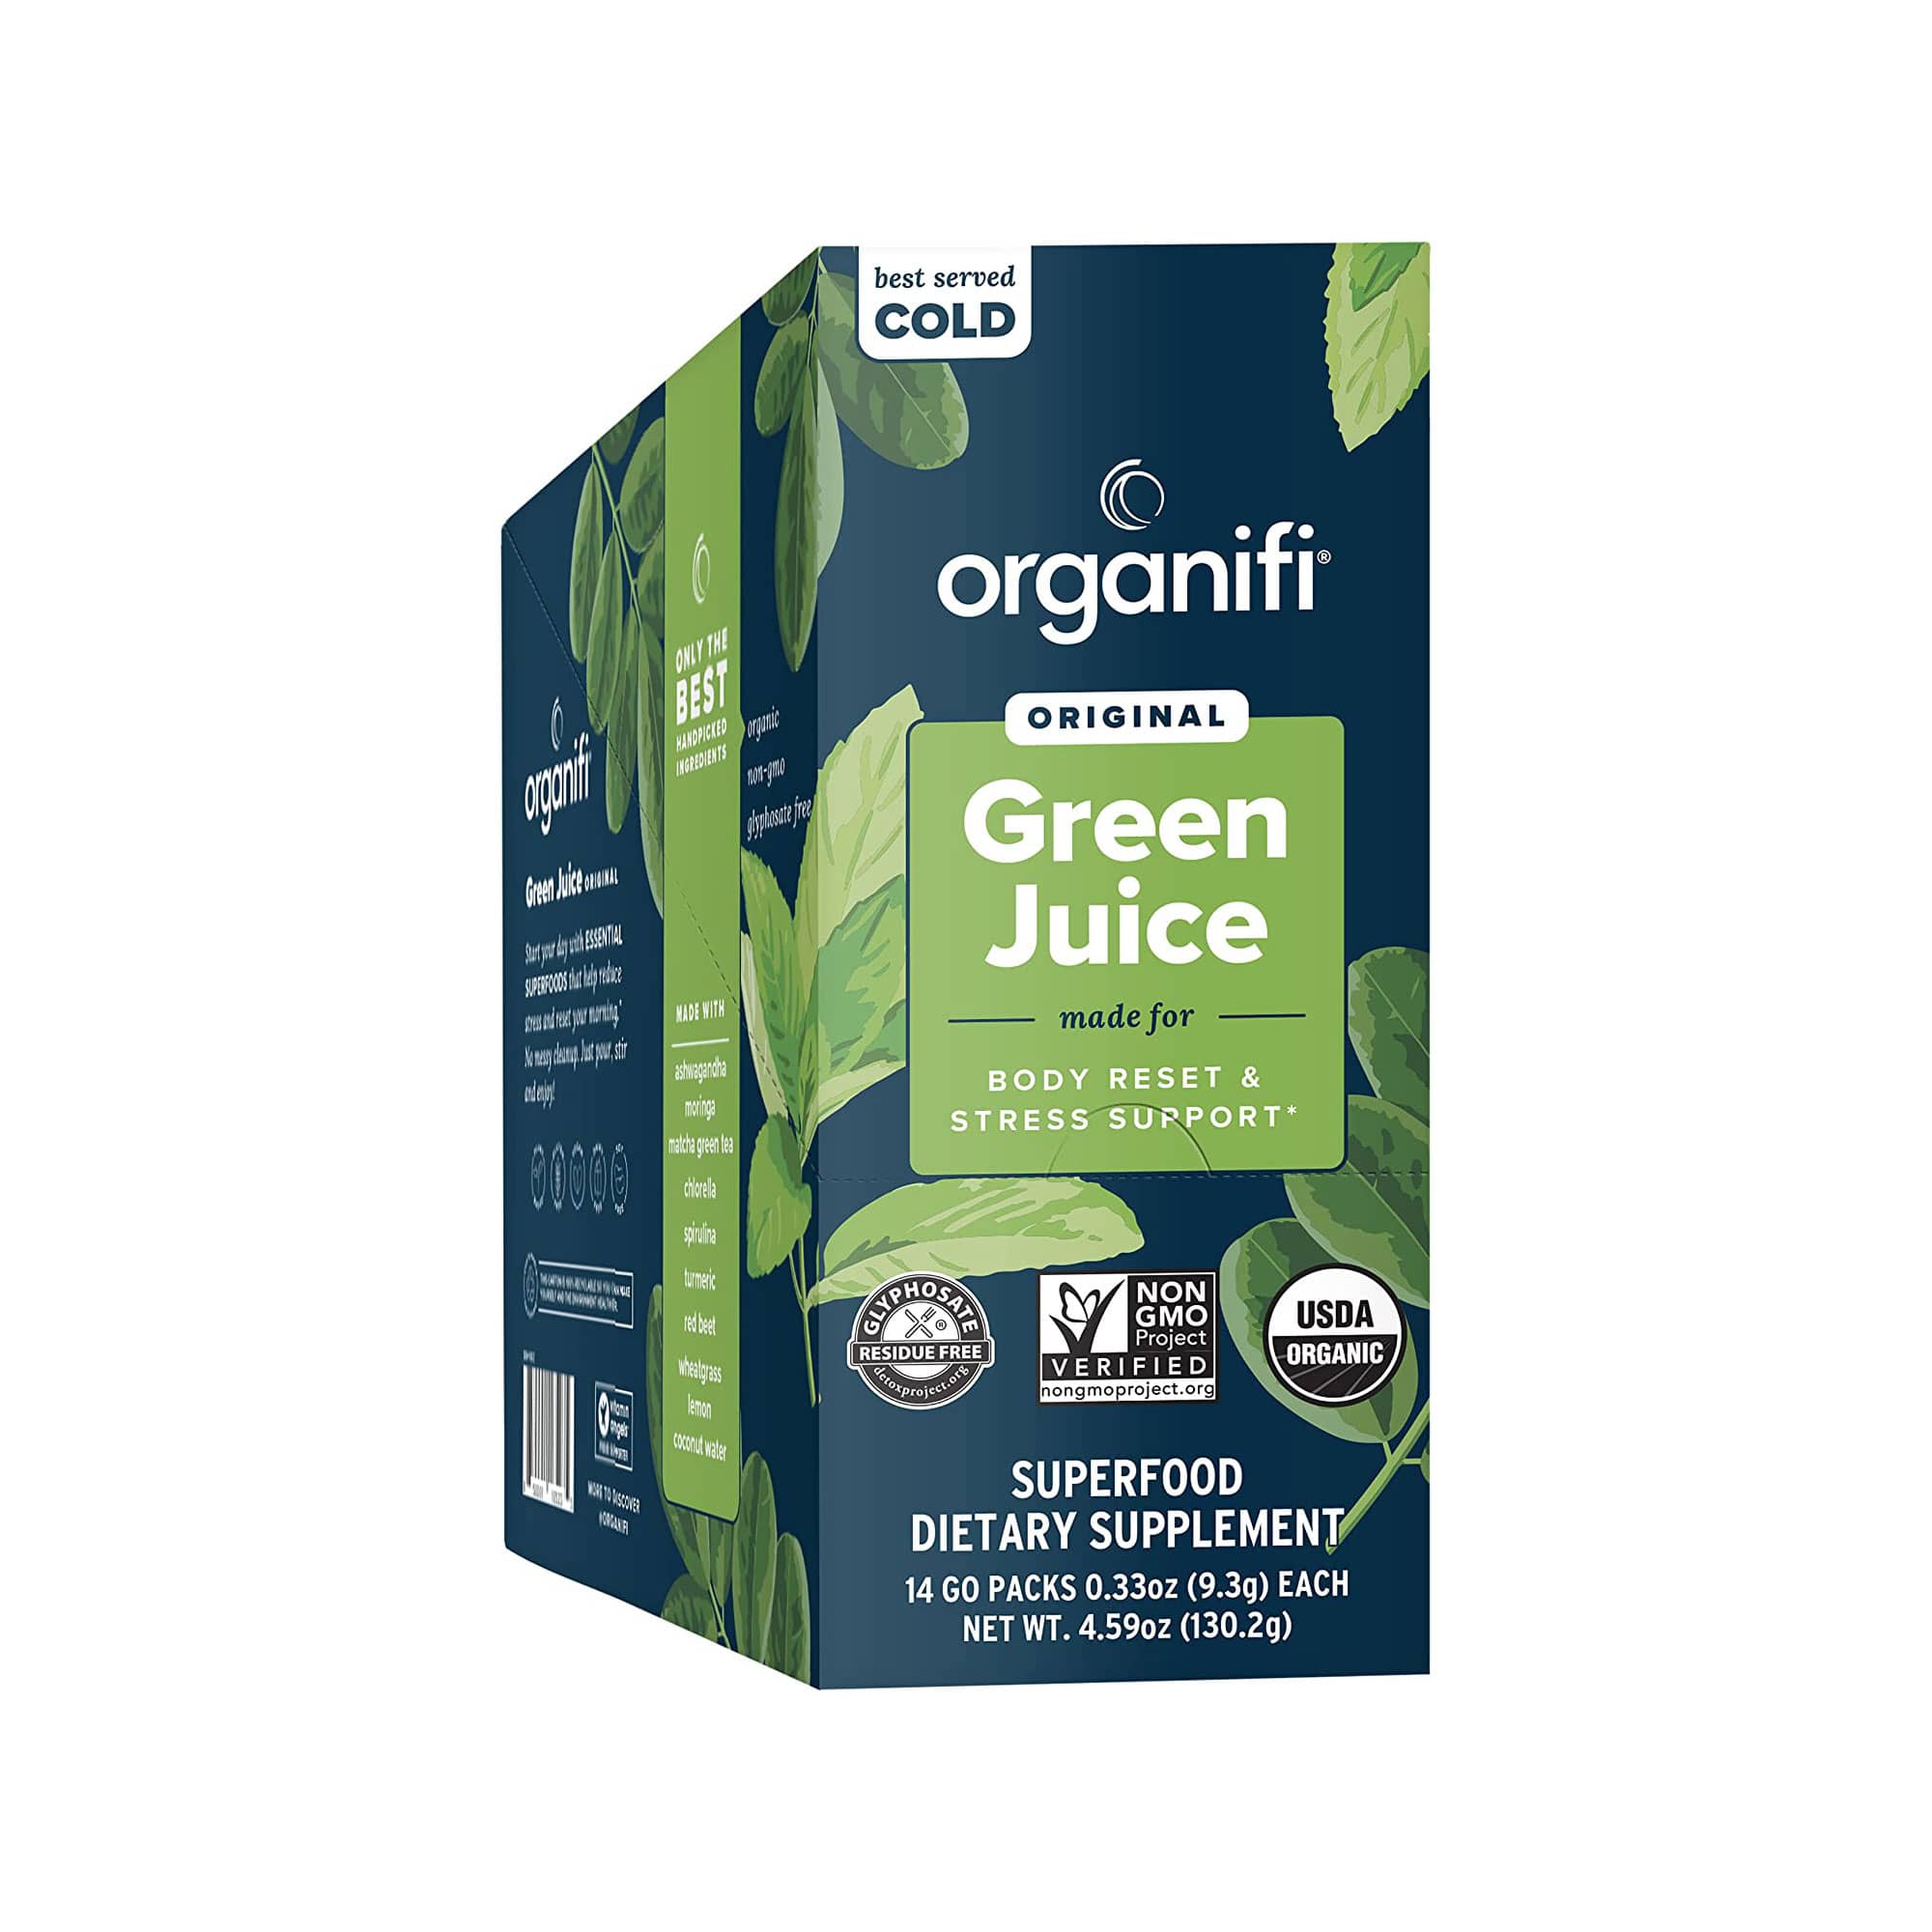 Organifi Green Juice Review - 11 Things You Need To Know for Beginners